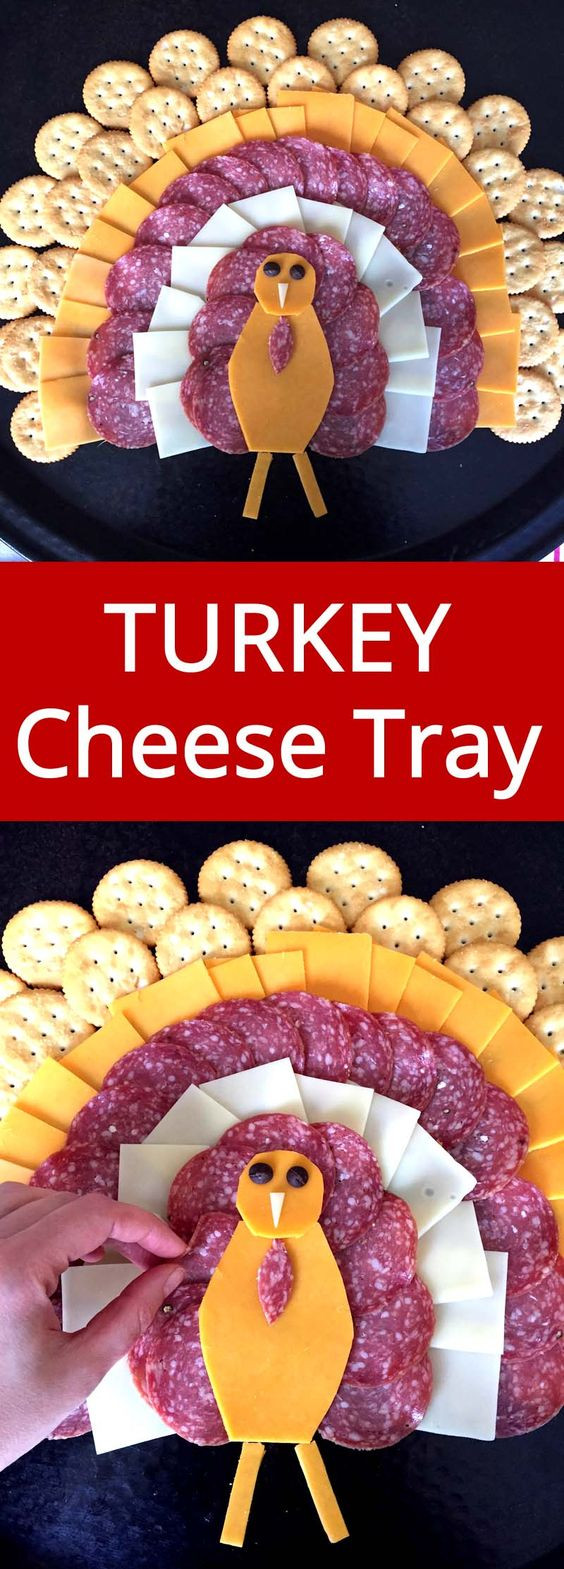 Appetizers For Thanksgiving Dinner Party
 25 Best Thanksgiving Recipes for Hosting Thanksgiving